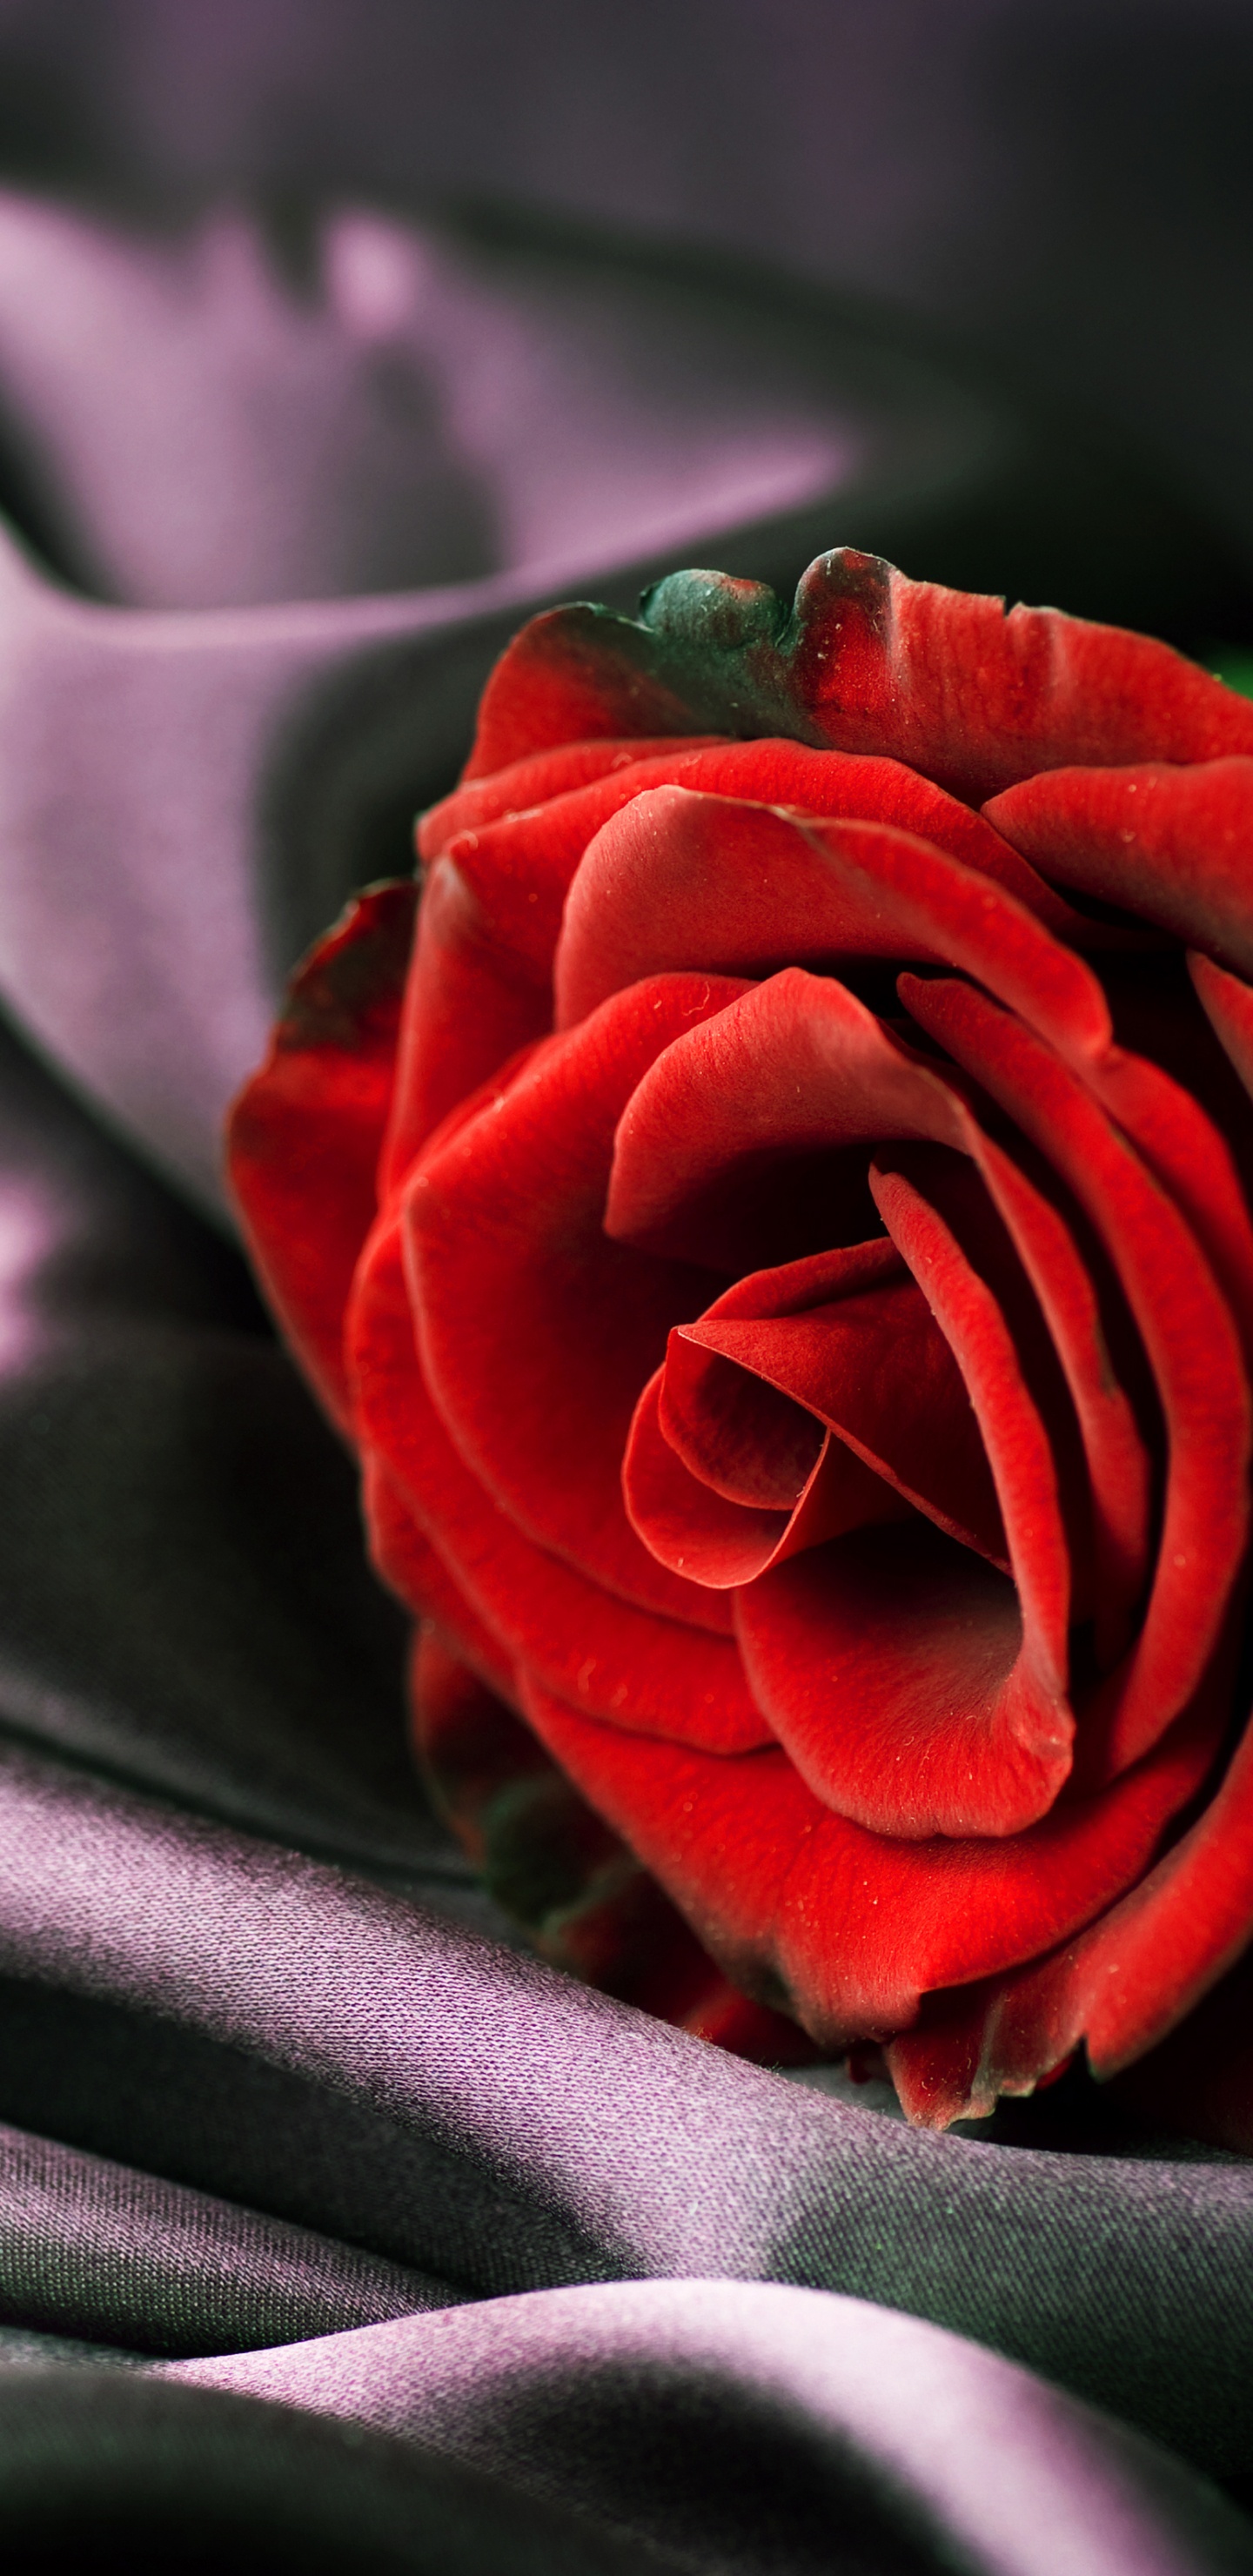 Red Rose on Gray Textile. Wallpaper in 1440x2960 Resolution